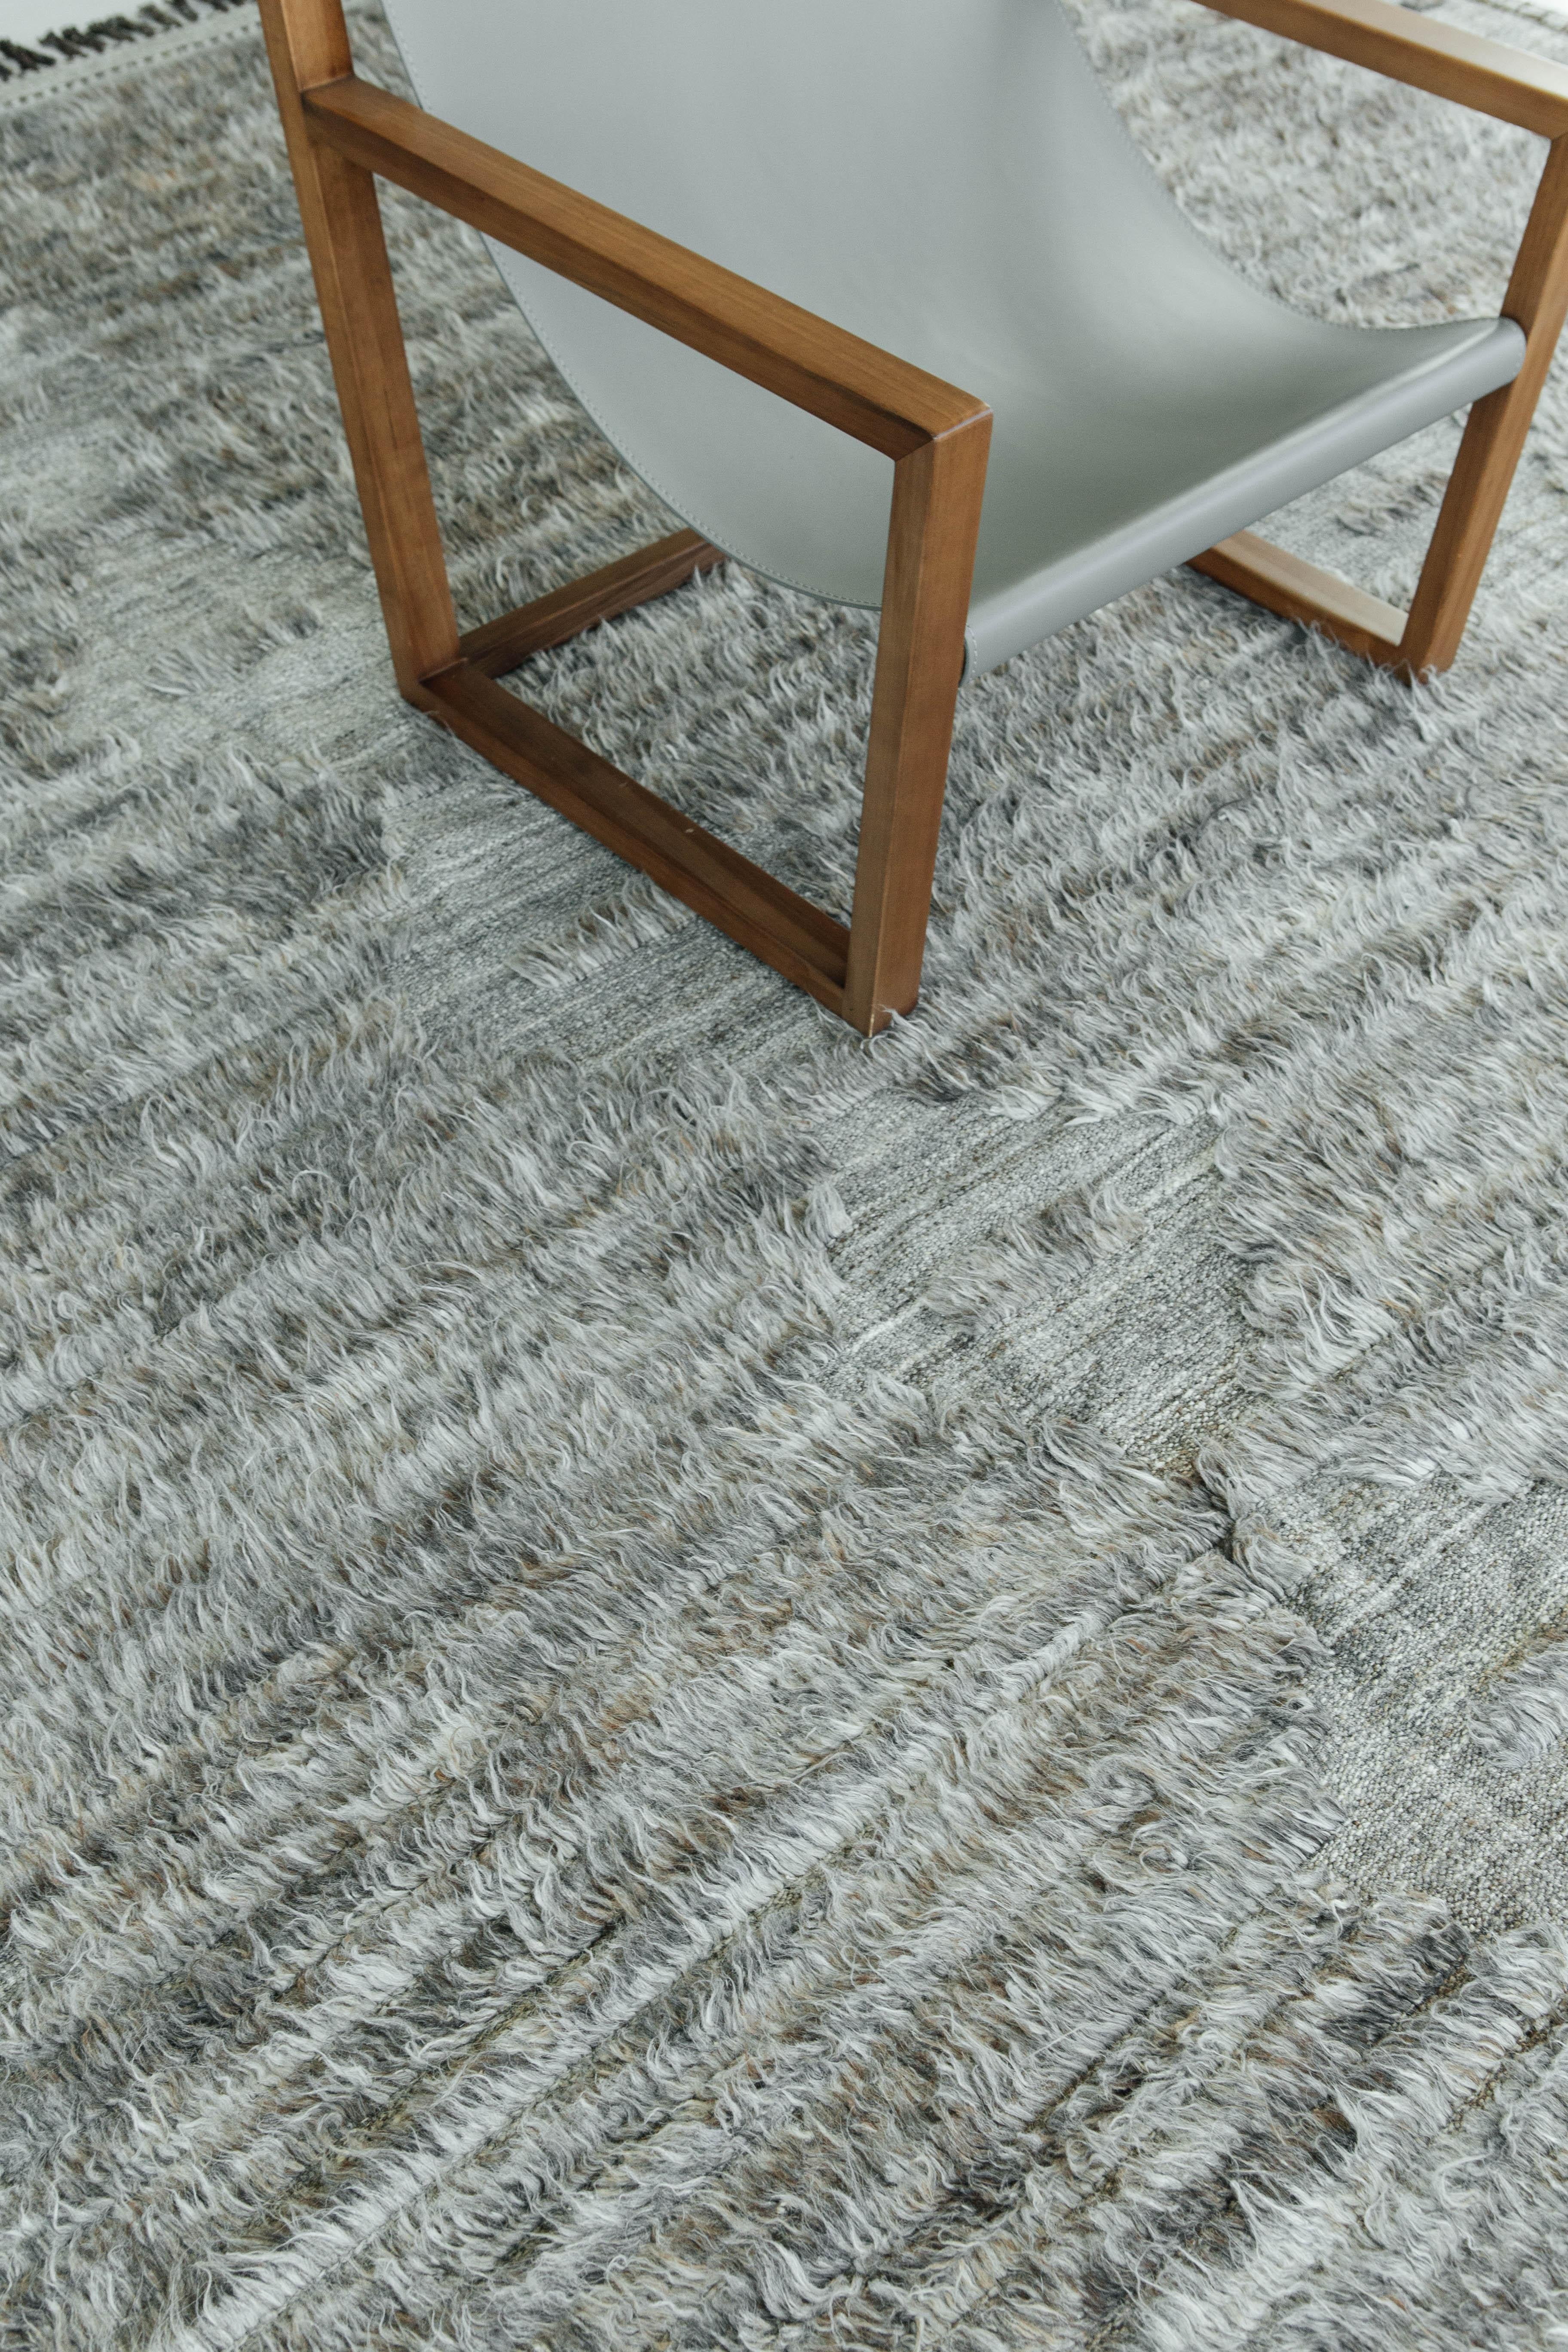 Beautifully weaved is our Picado shag rug. Designed in Los Angeles, this embossed pile weave has smokey tones that bring attention to the embossed diamonds that are latticed throughout this elegant wool piece.



Rug Number 28154
Size 11' 0